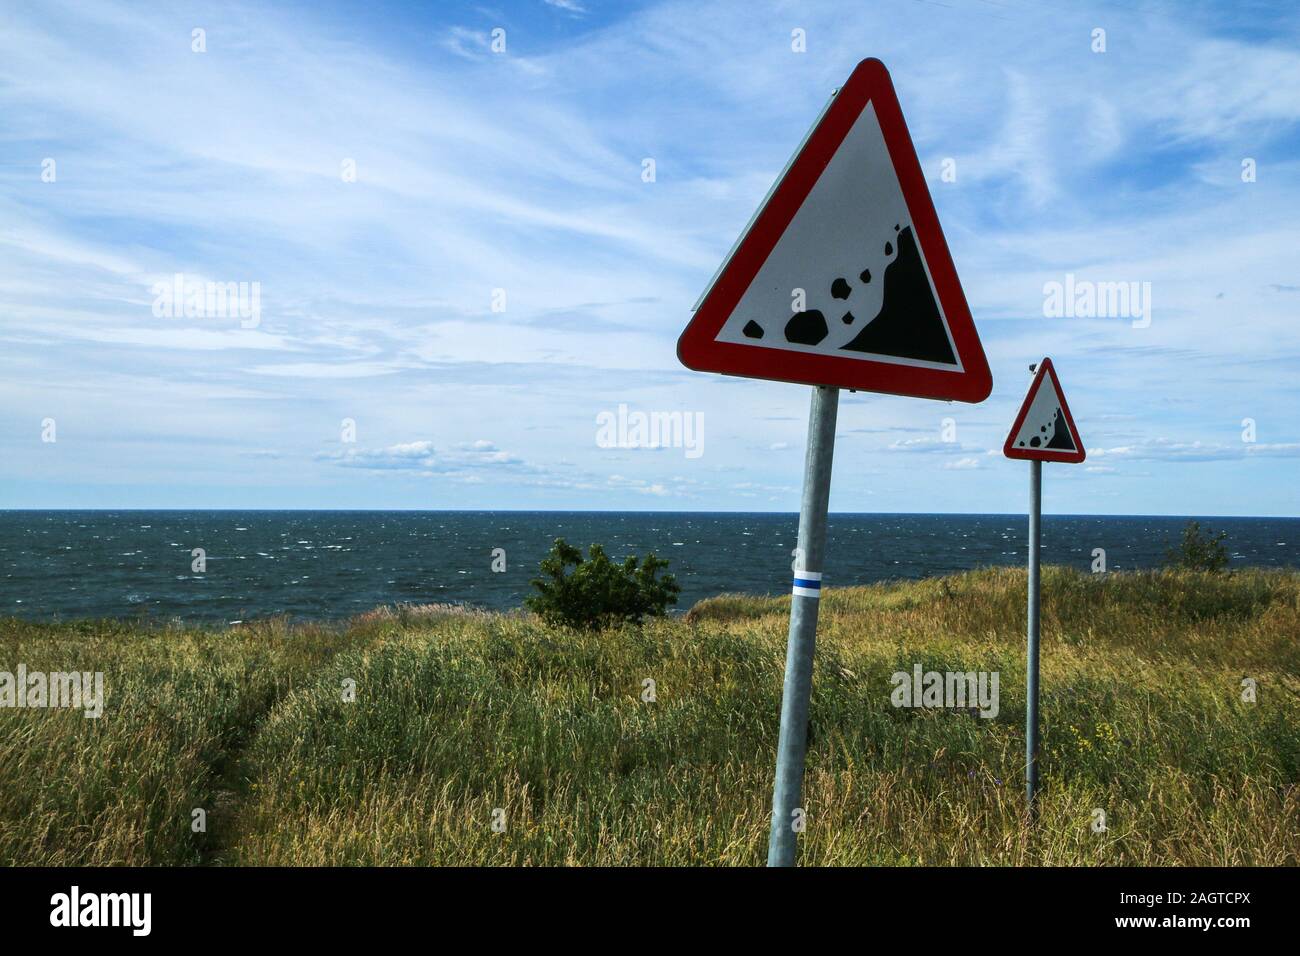 The Picture from the wild coast of Paldiski in Estonia. You can see the warning signs showing the instability of the cliffs. Stock Photo